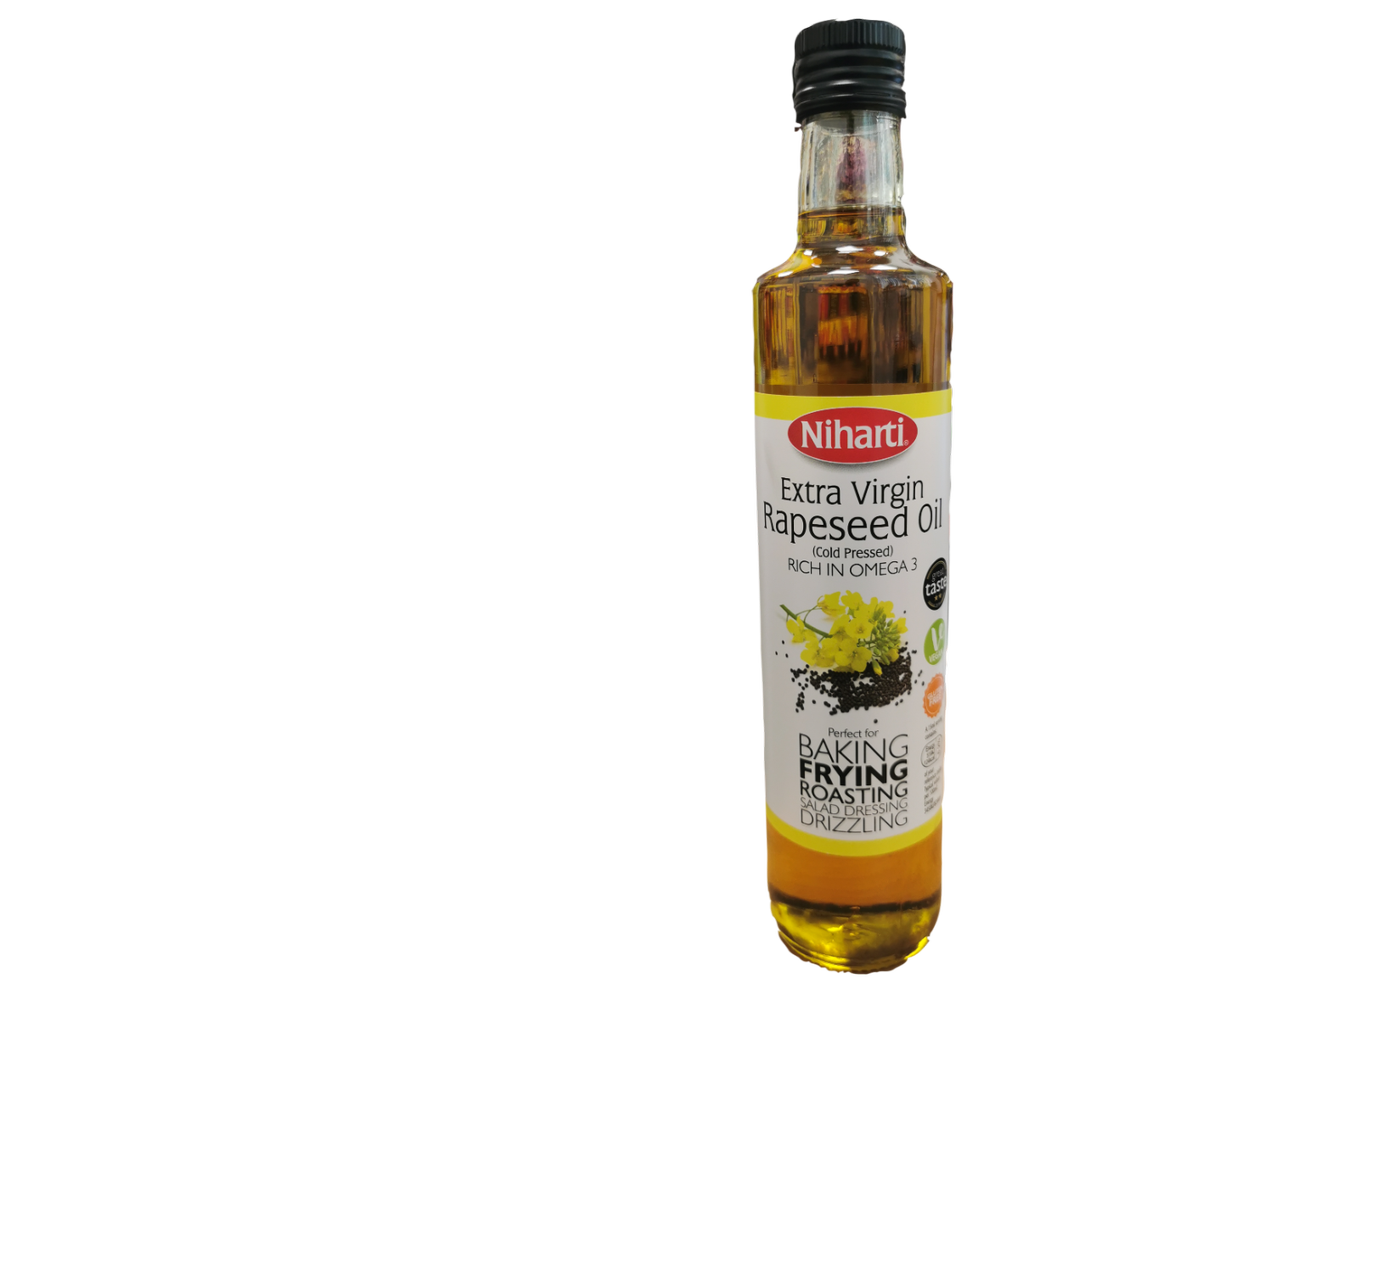 Niharti Extra Virgin Rapeseed Oil
 (Cold Pressed)